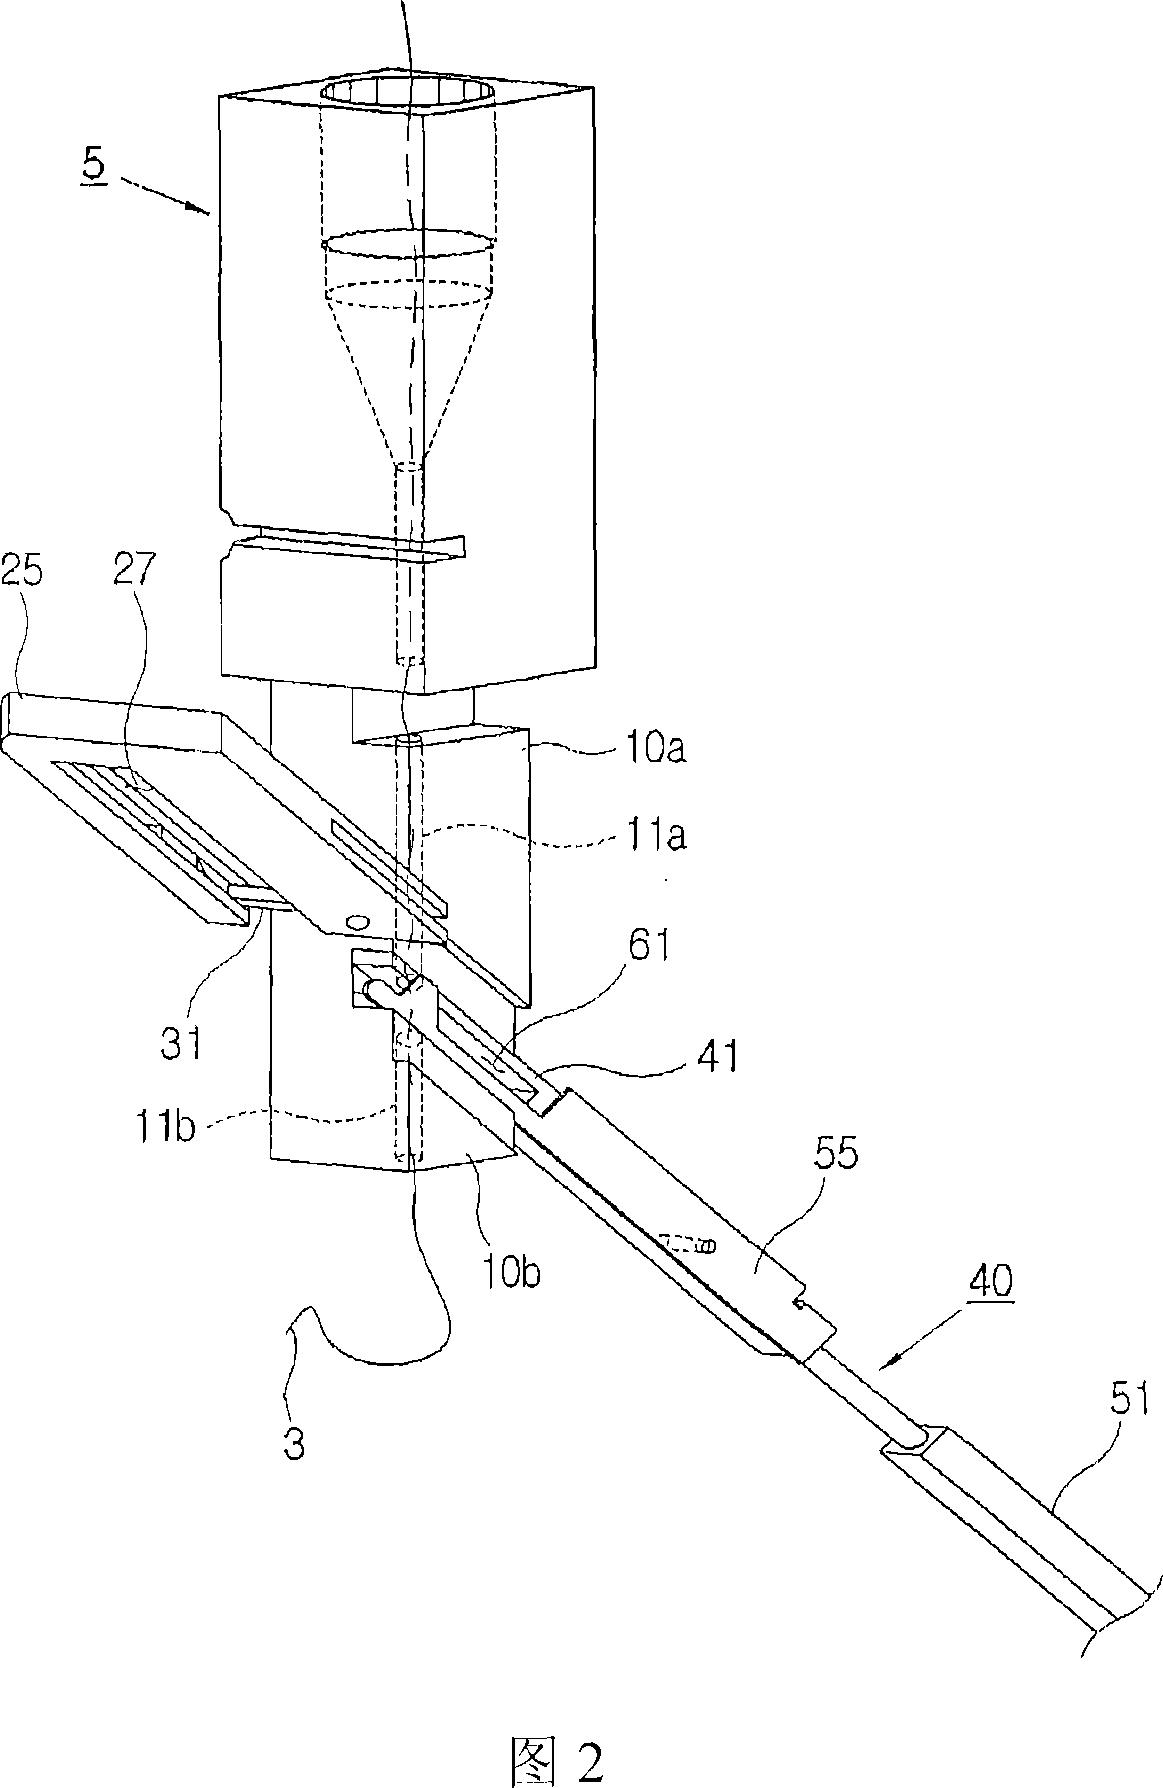 Thread feeding apparatus for an automatic embroidering machine